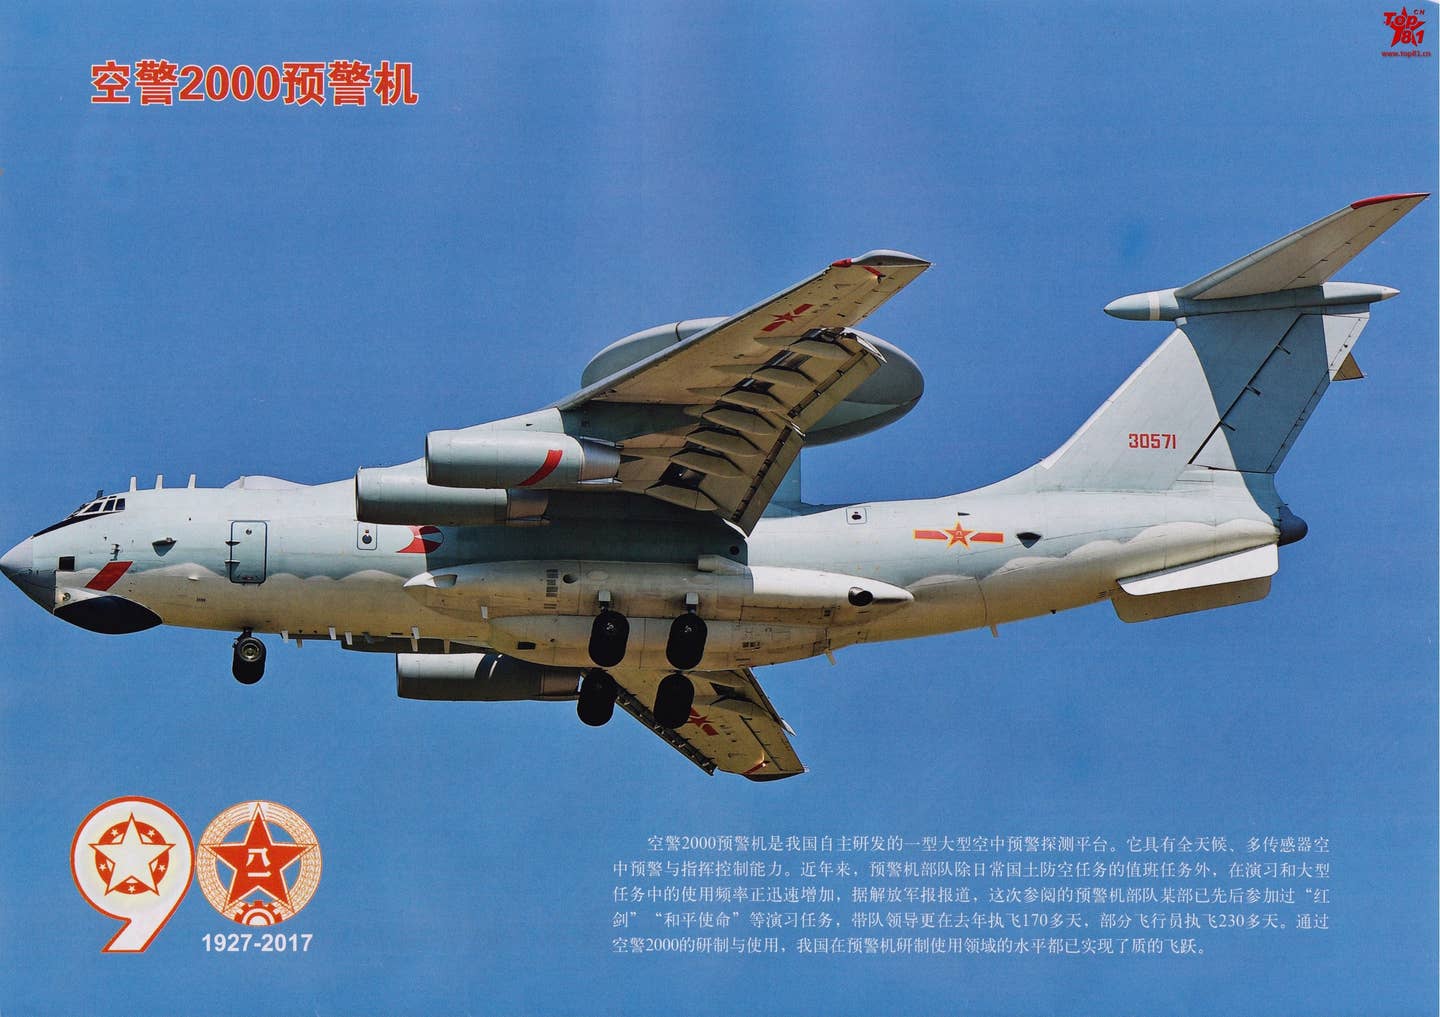 An apparently official PLAAF photo of a KJ-2000, serial number 30571, assigned to the 26th Division.<em> Top81/via Chinese internet</em>